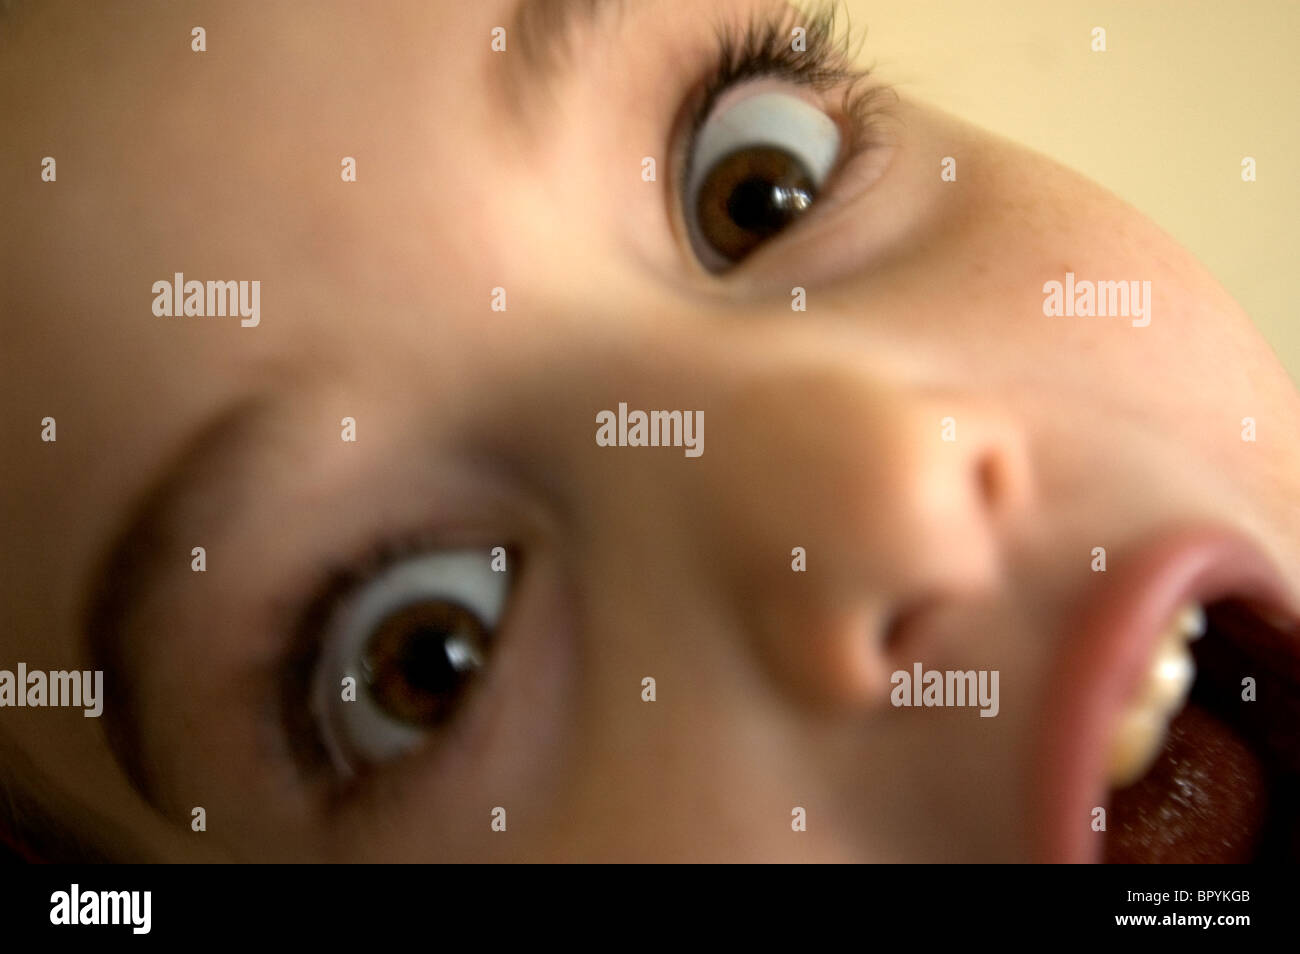 A young girl makes a silly face Stock Photo